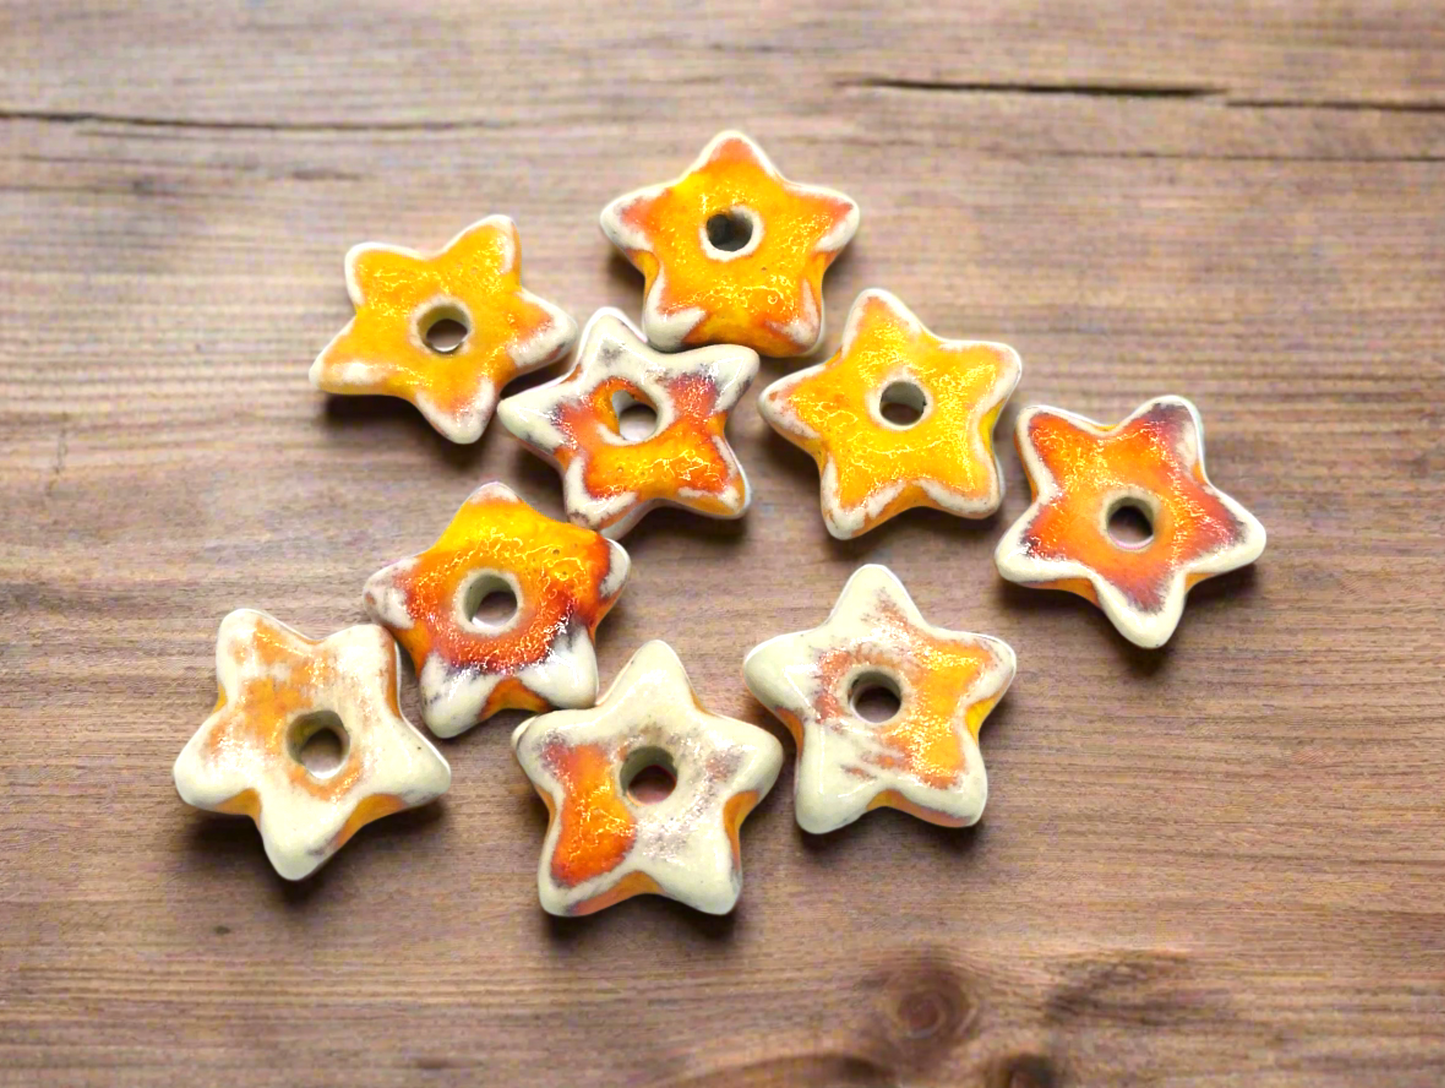 9Pc 15mm Orange Tiny Star Beads, Handmade Ceramic Macrame Beads, Mini Star Charms For Jewelry Making, Spacer Beads, Unique Clay Beads